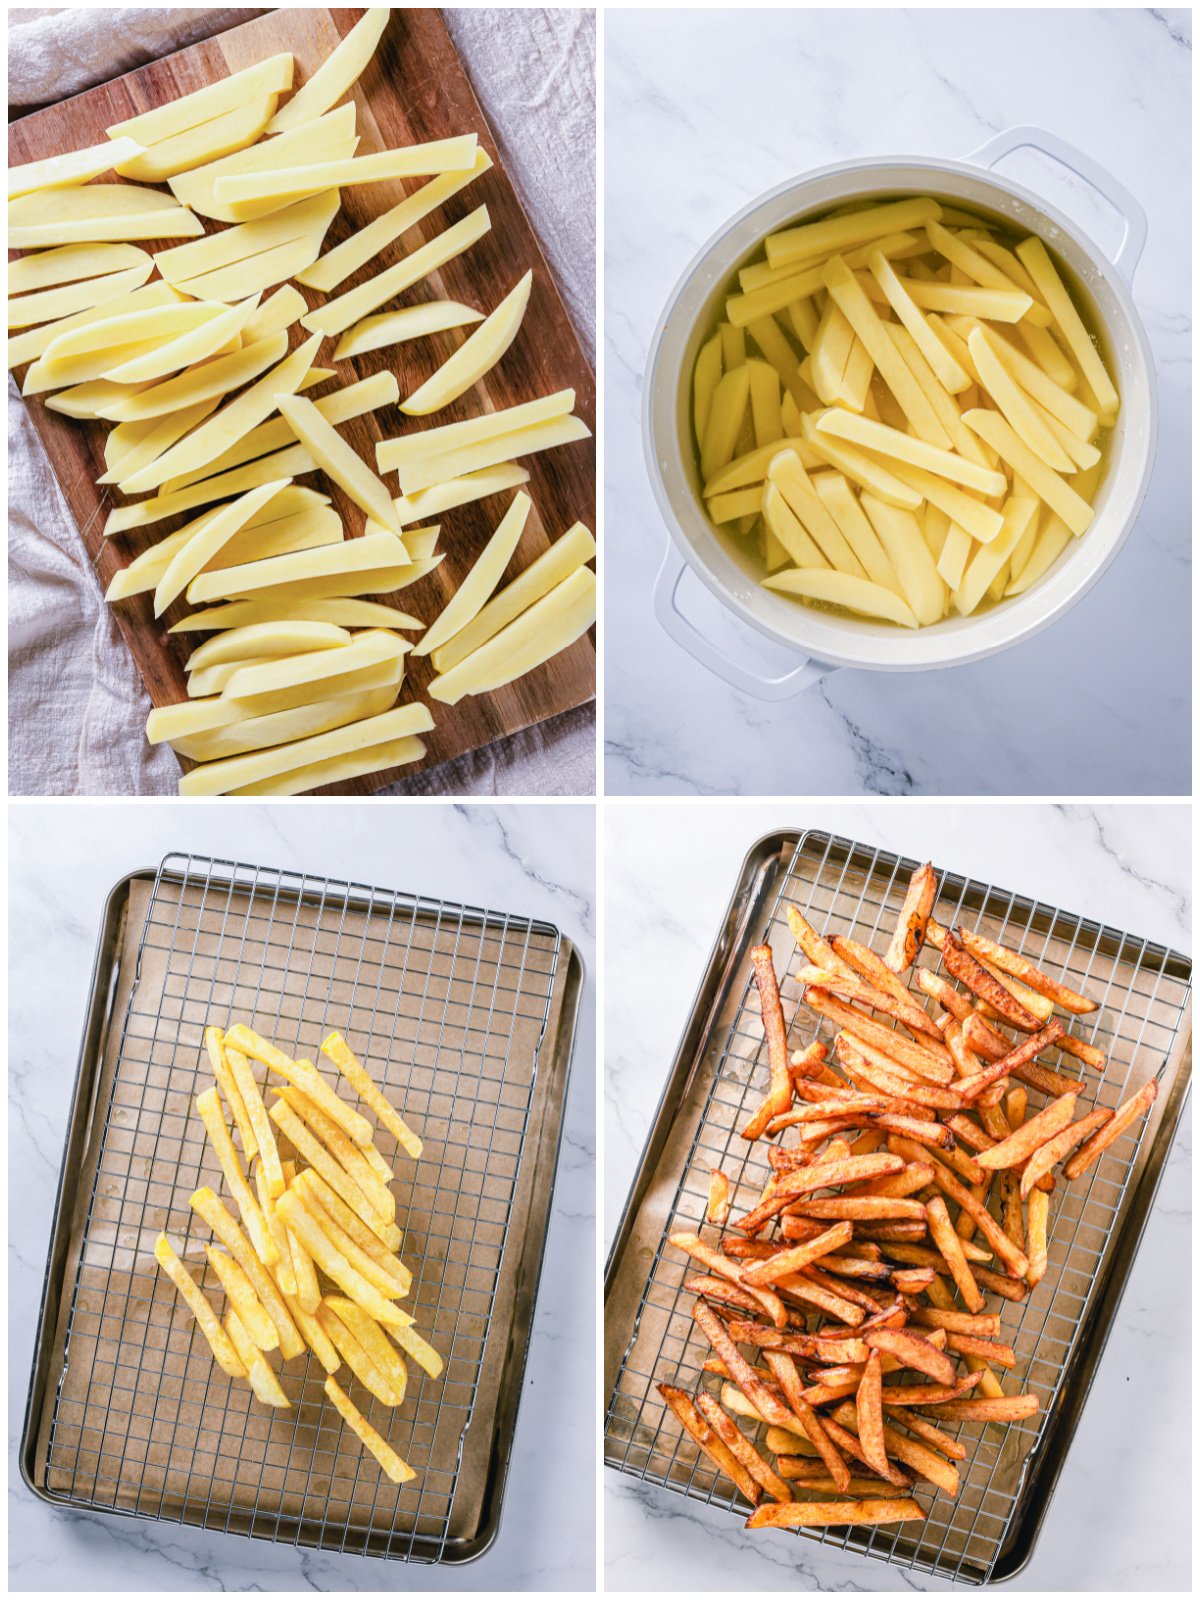 Step by step photos on how to make Homemade French Fries.